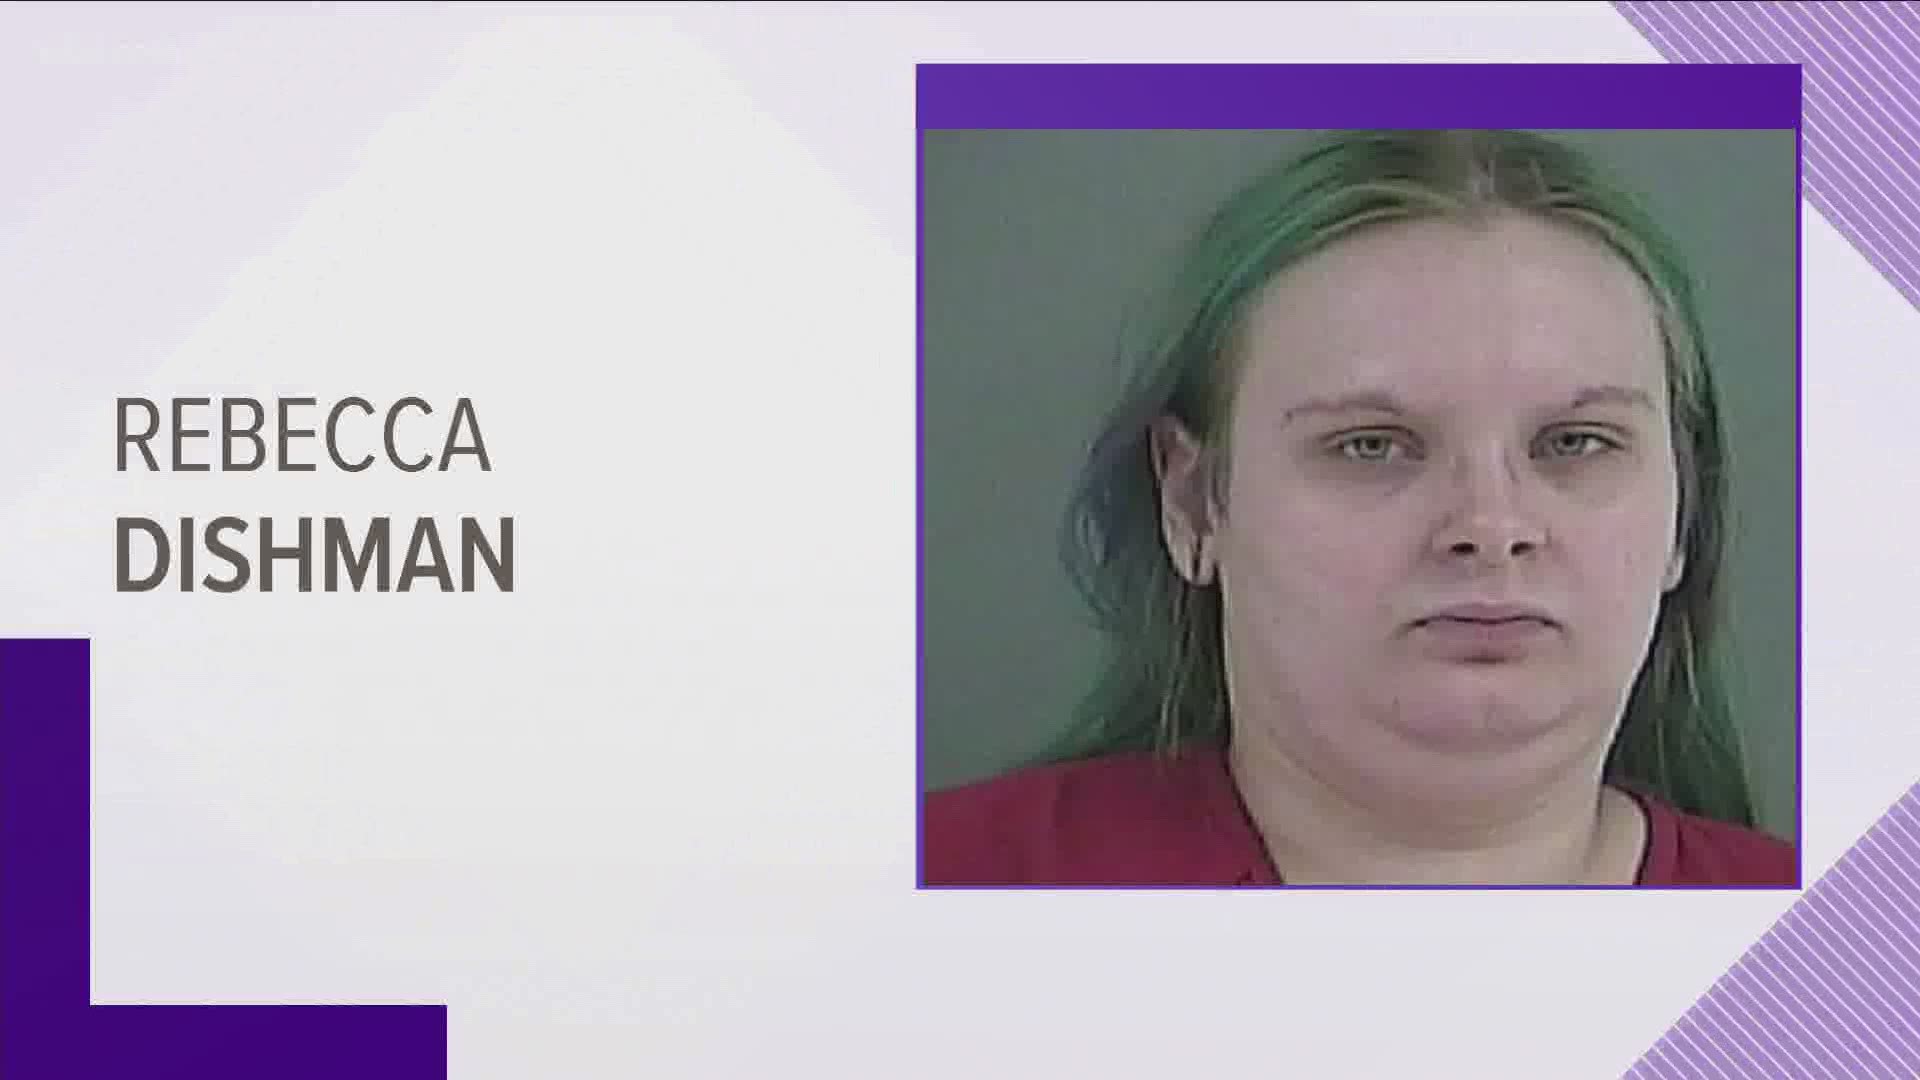 According to the clerk's office, a judge denied a request from Rebecca Dishman's attorney for her bond to be lowered on Tuesday, August 18.